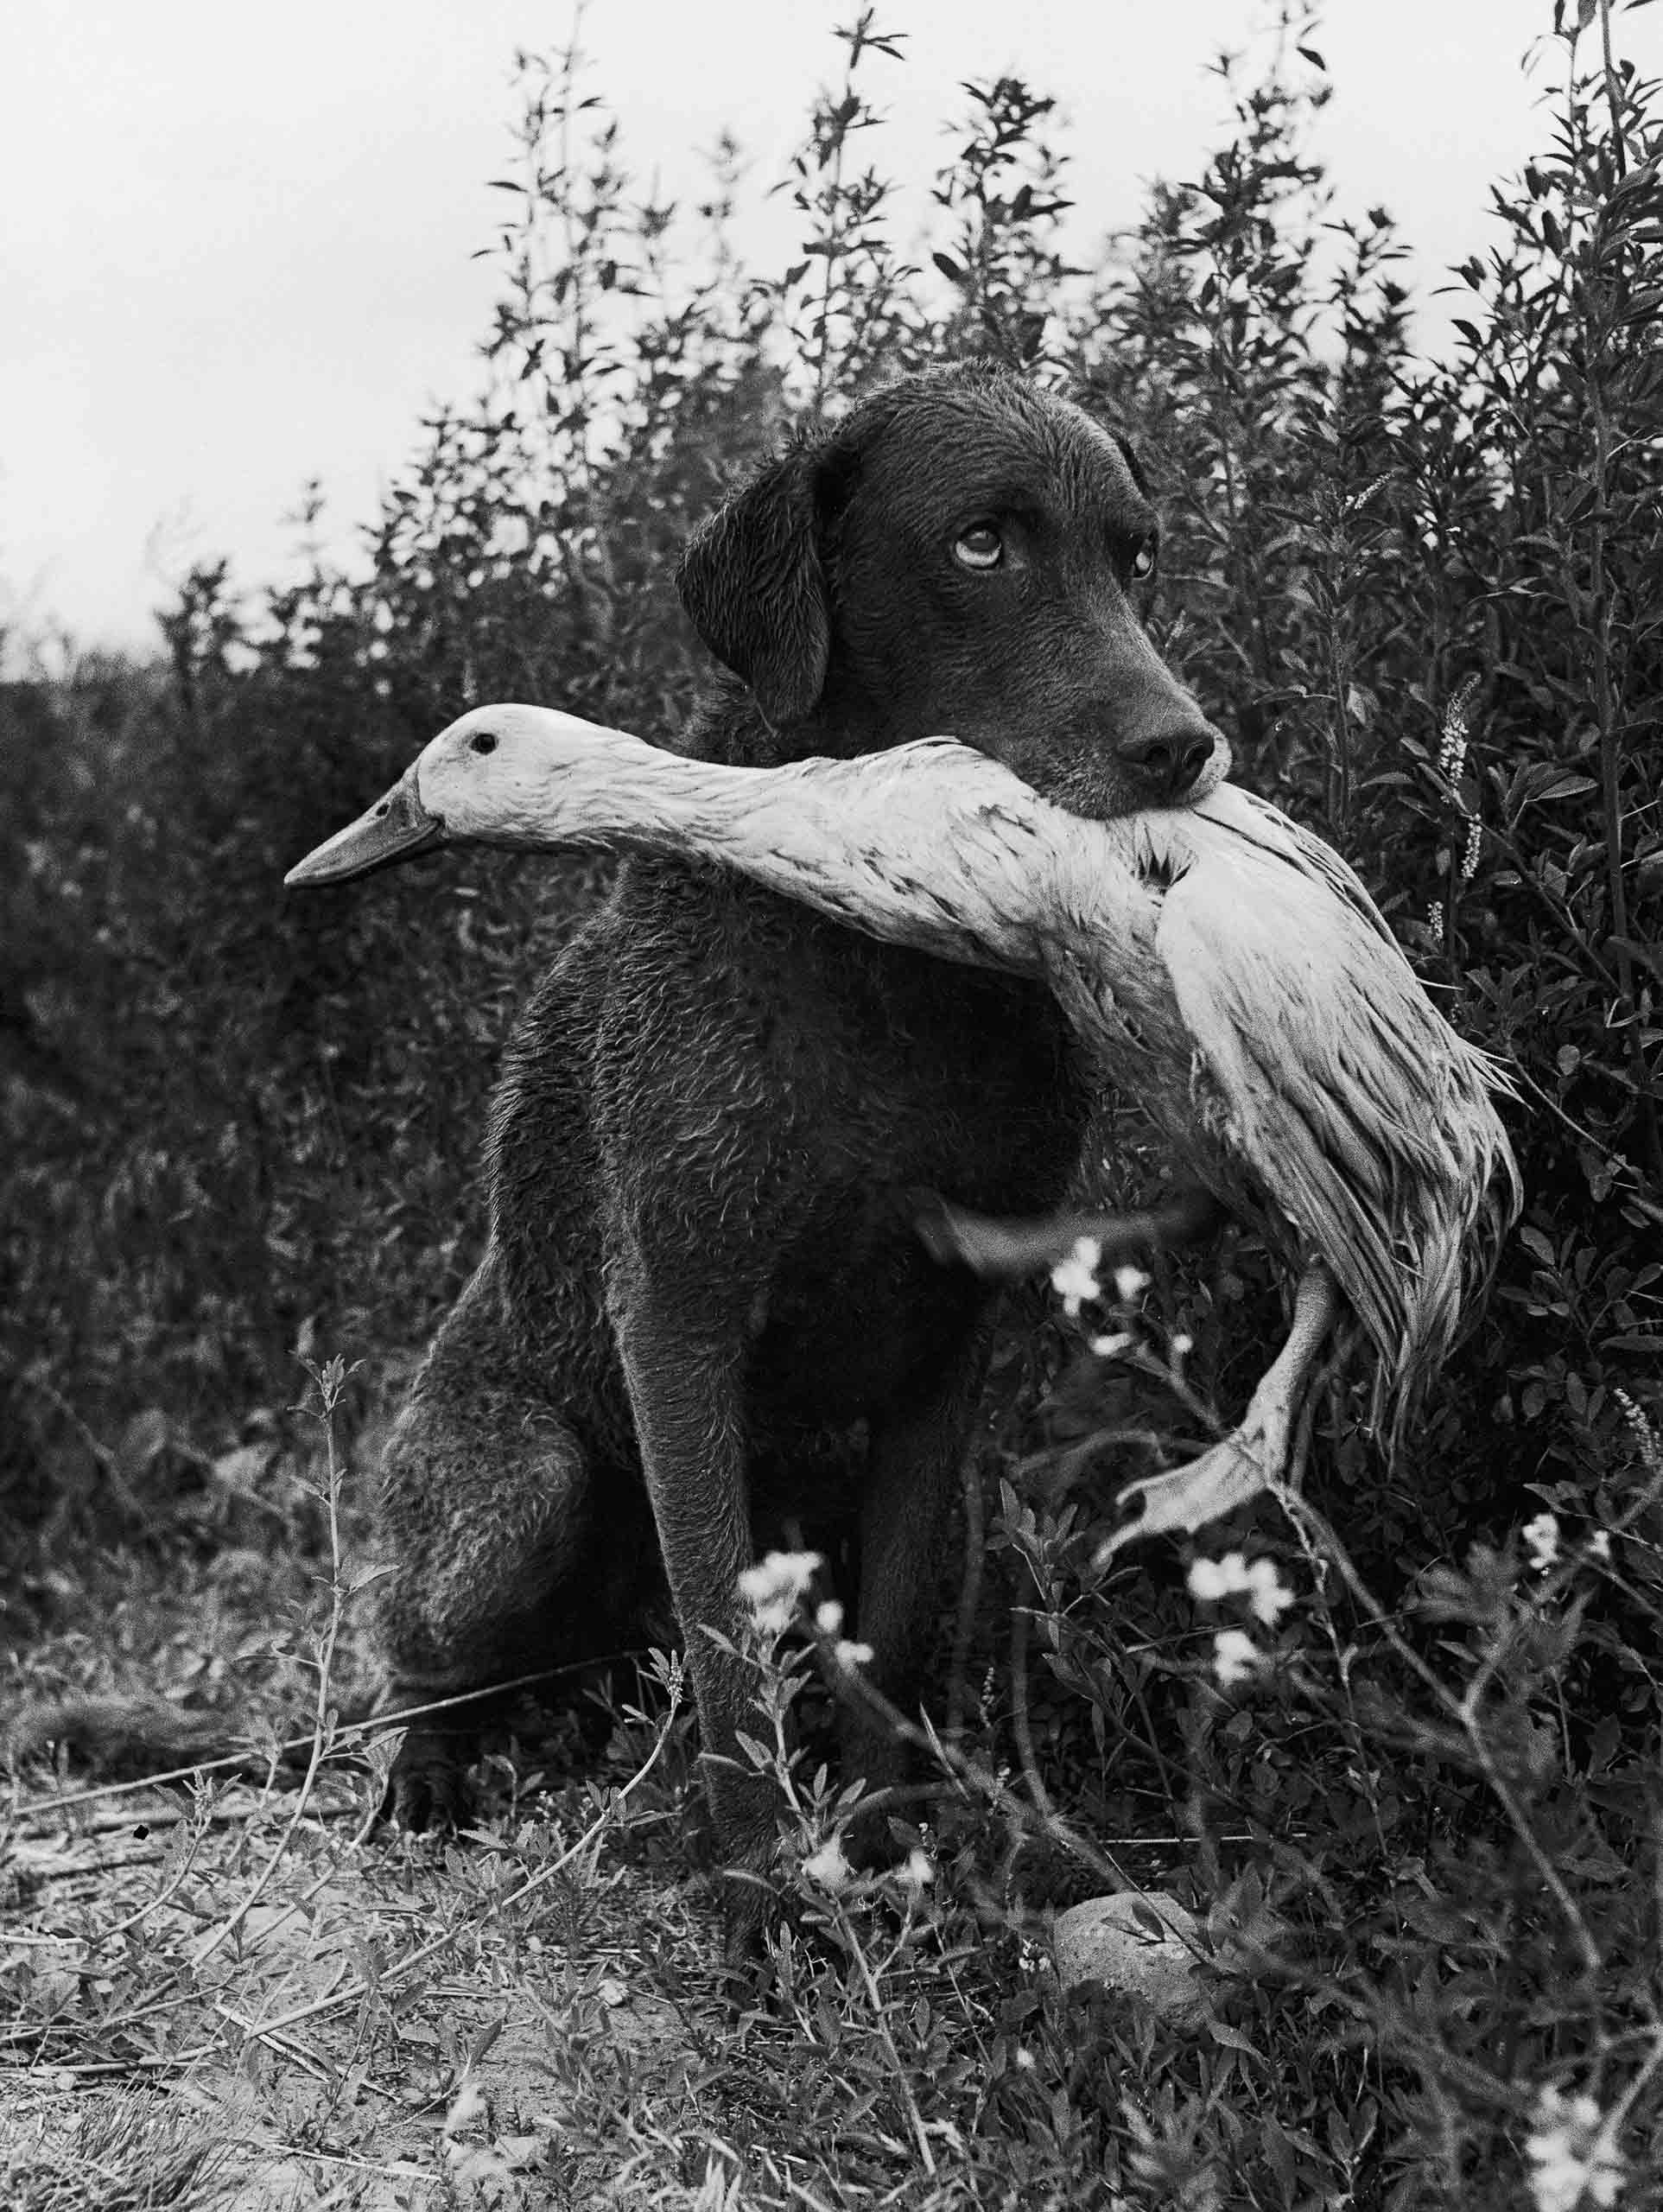 Trigger, a Chesapeake Bay retriever, plays a game with Donald, a pet duck, on a family ranch in Yakima, Washington, 1949.